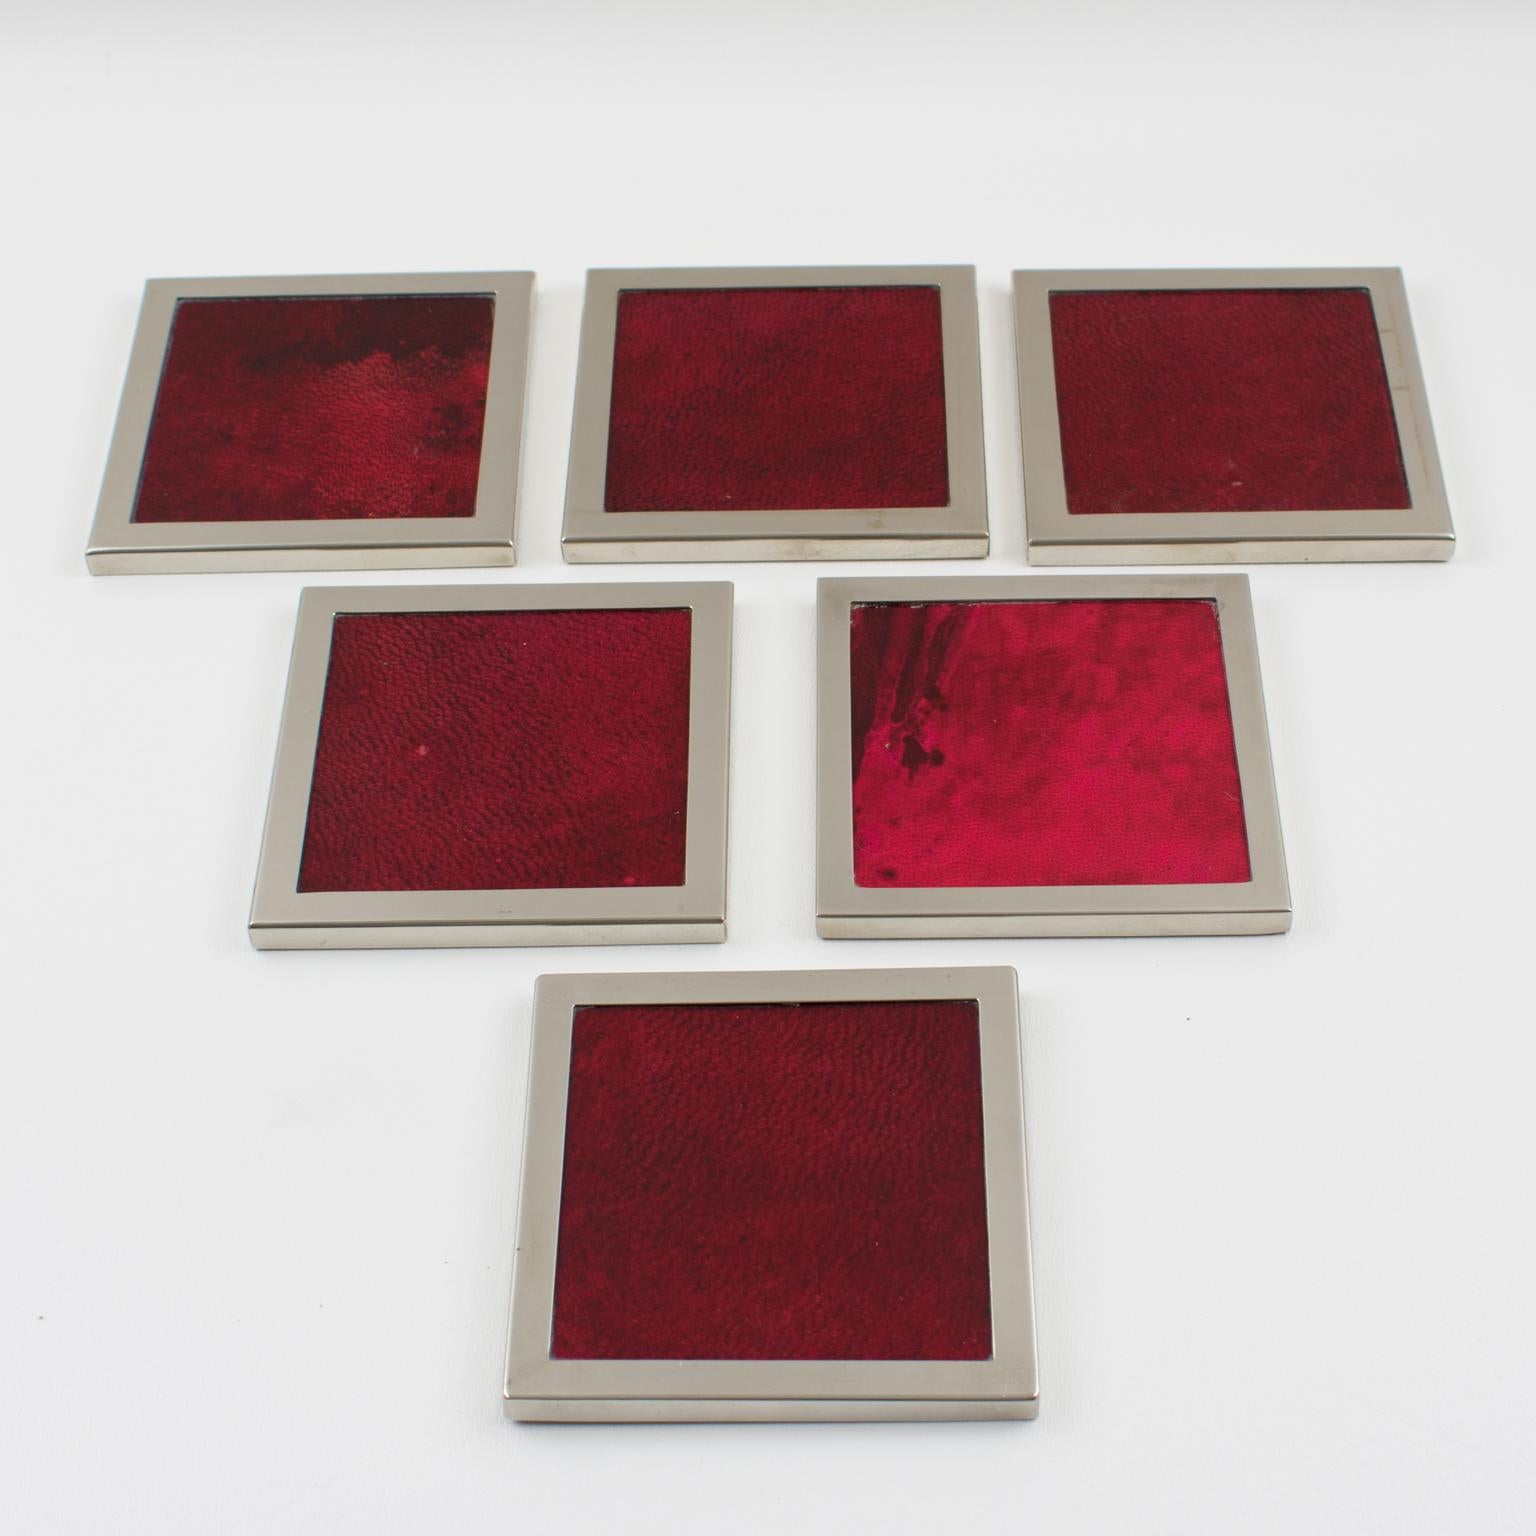 Elegant lacquered goatskin and chromed metal barware coasters, a set of 6 pieces by Italian designer Aldo Tura, Milano. A beautiful 1970s square wooden base with lacquered oxblood colored goatskin parchment veneer and chromed metal trims. Original